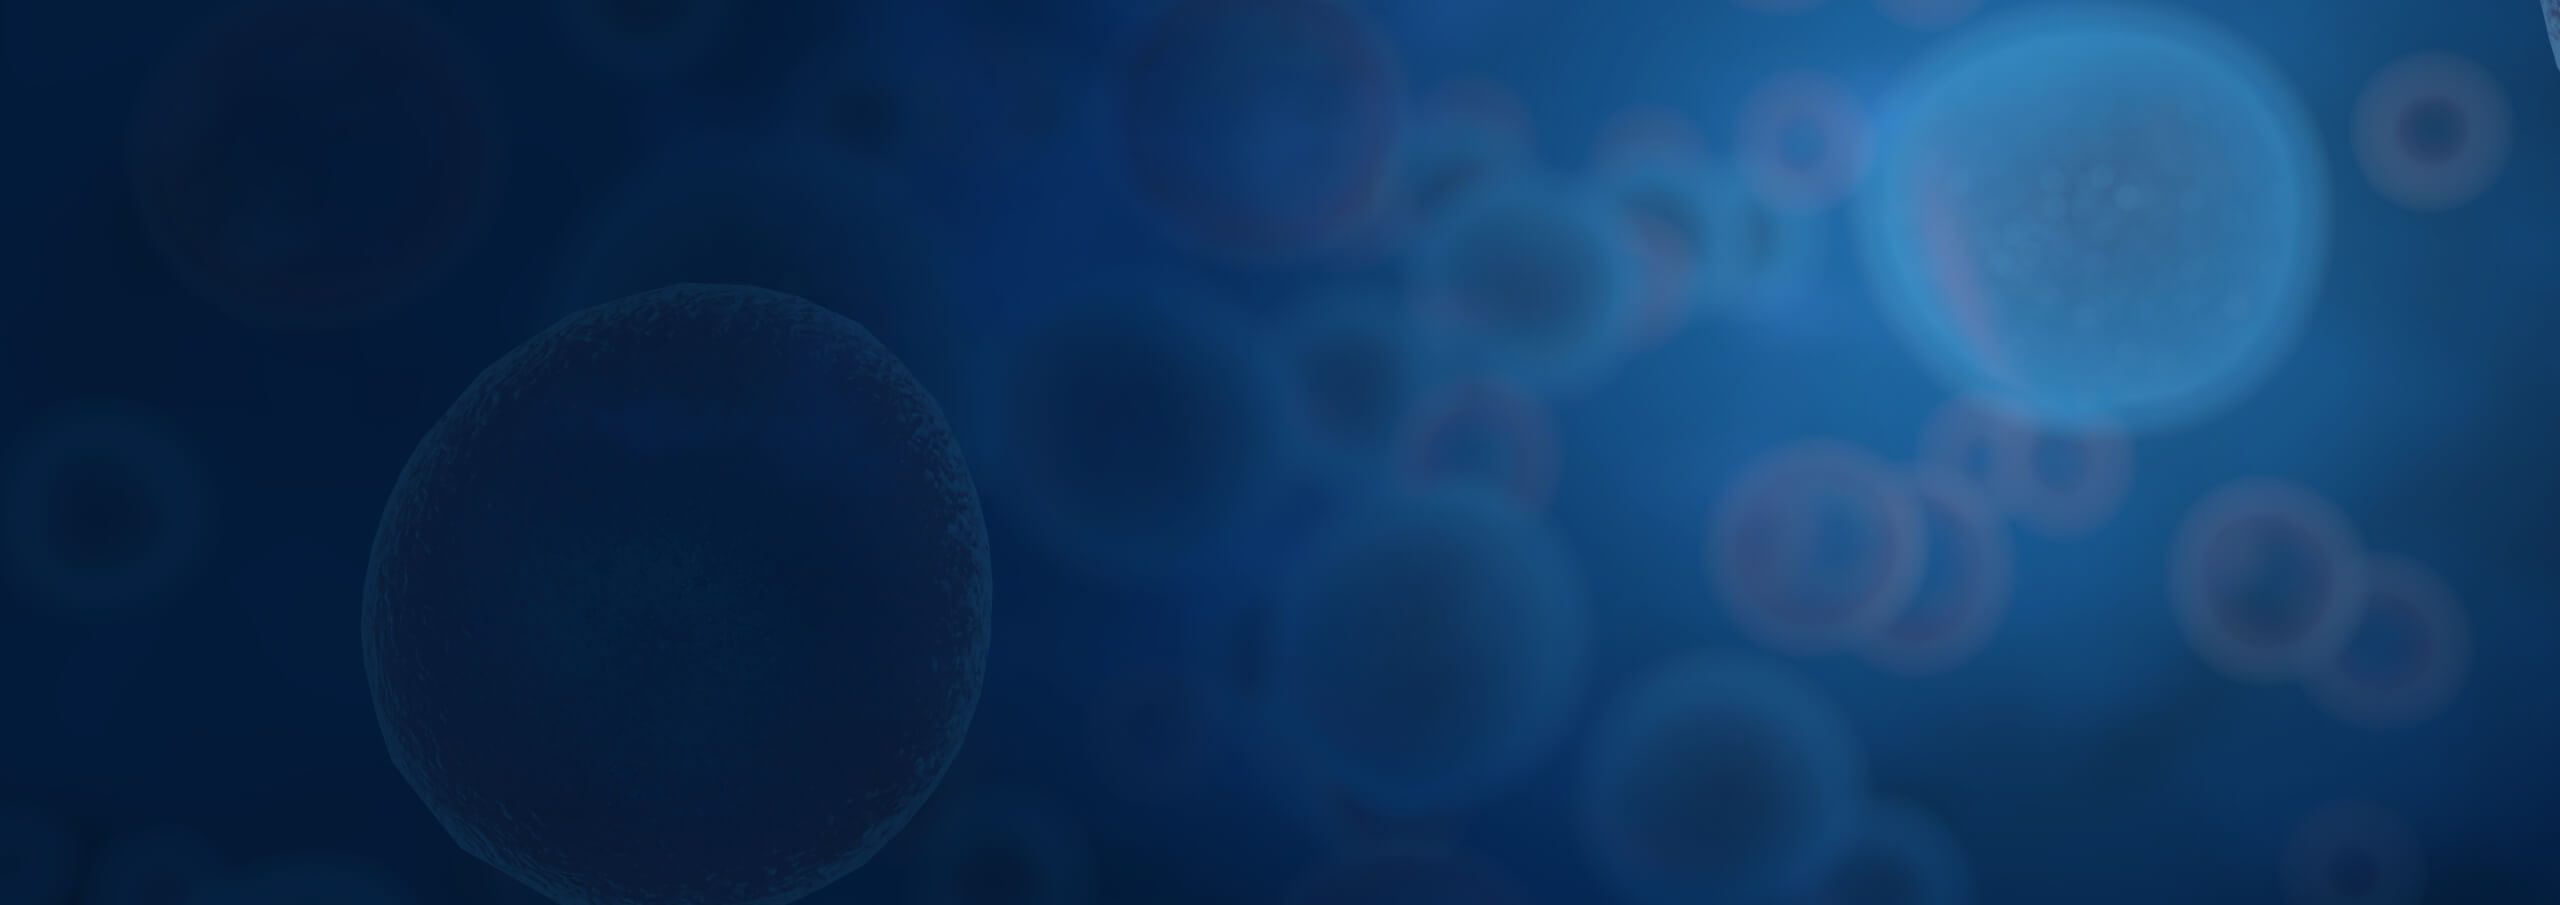 3D illustration of T cells attacking cancer cells overlayed with blue background.